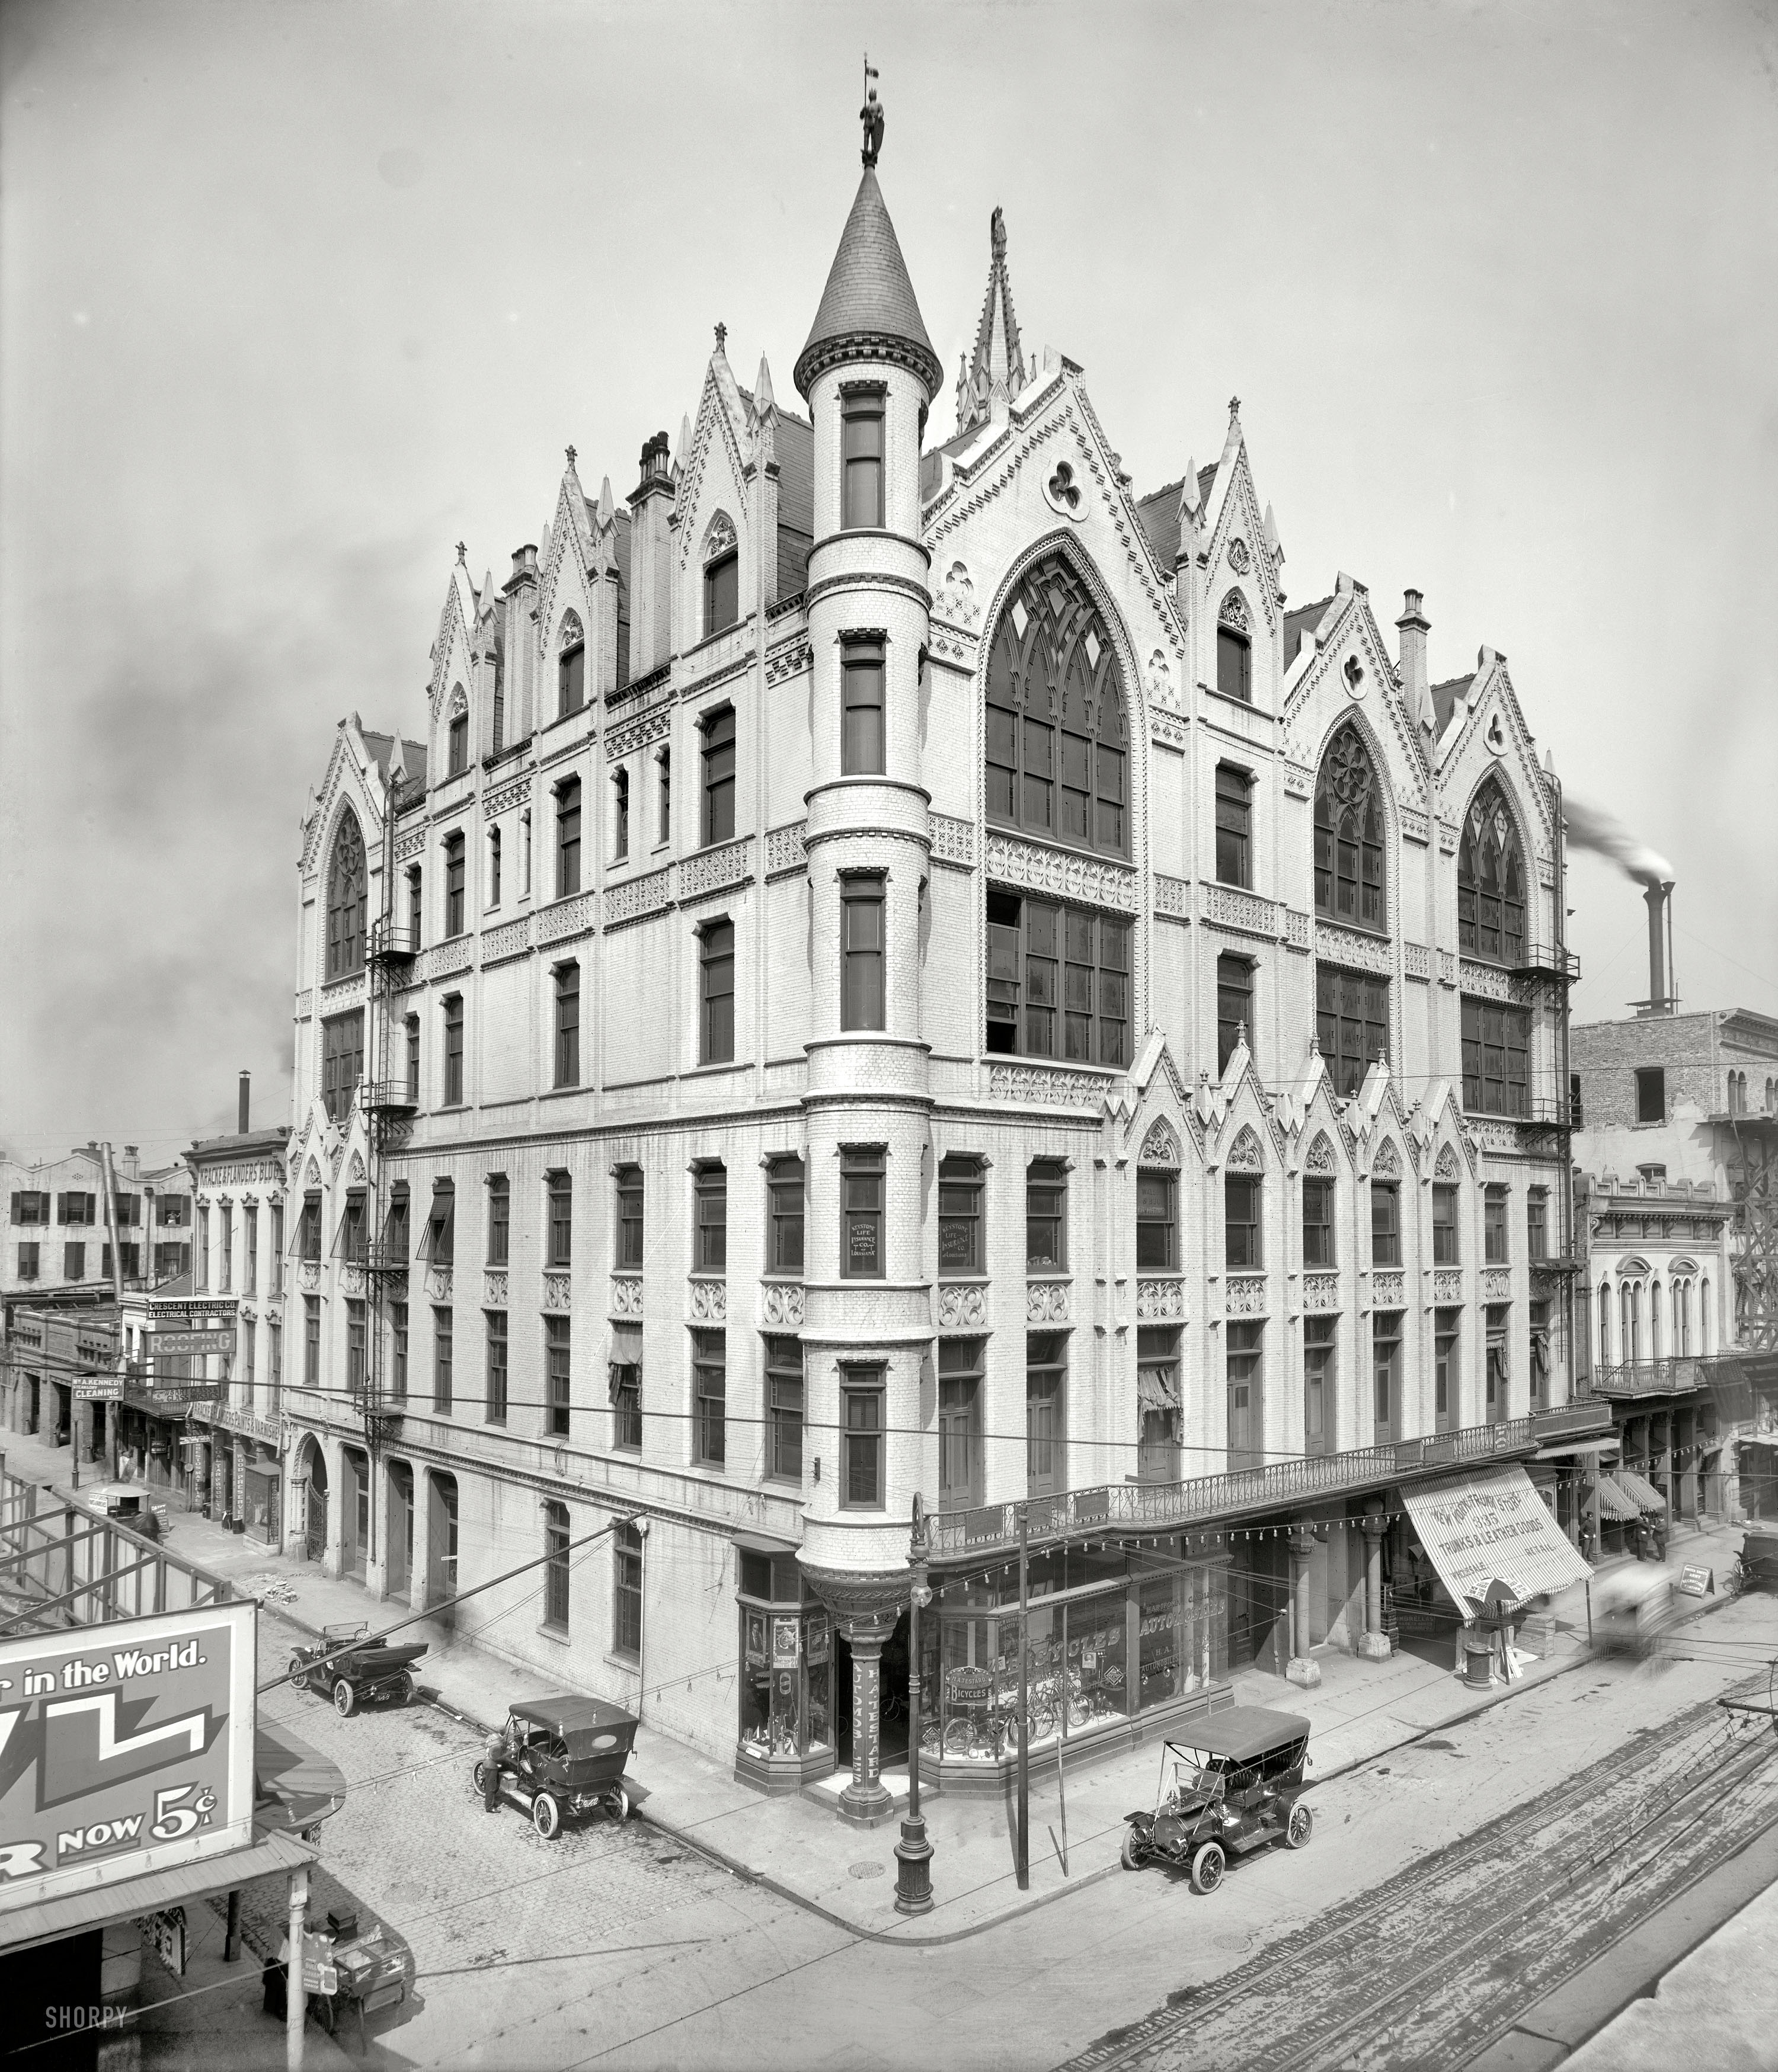 Circa 1910, continuing our sojourn in the Crescent City. "Masonic Temple, New Orleans." Home to H.A. Testard's store ("Bicycles, Automobiles").  8x10 inch dry plate glass negative, Detroit Publishing Company. View full size.